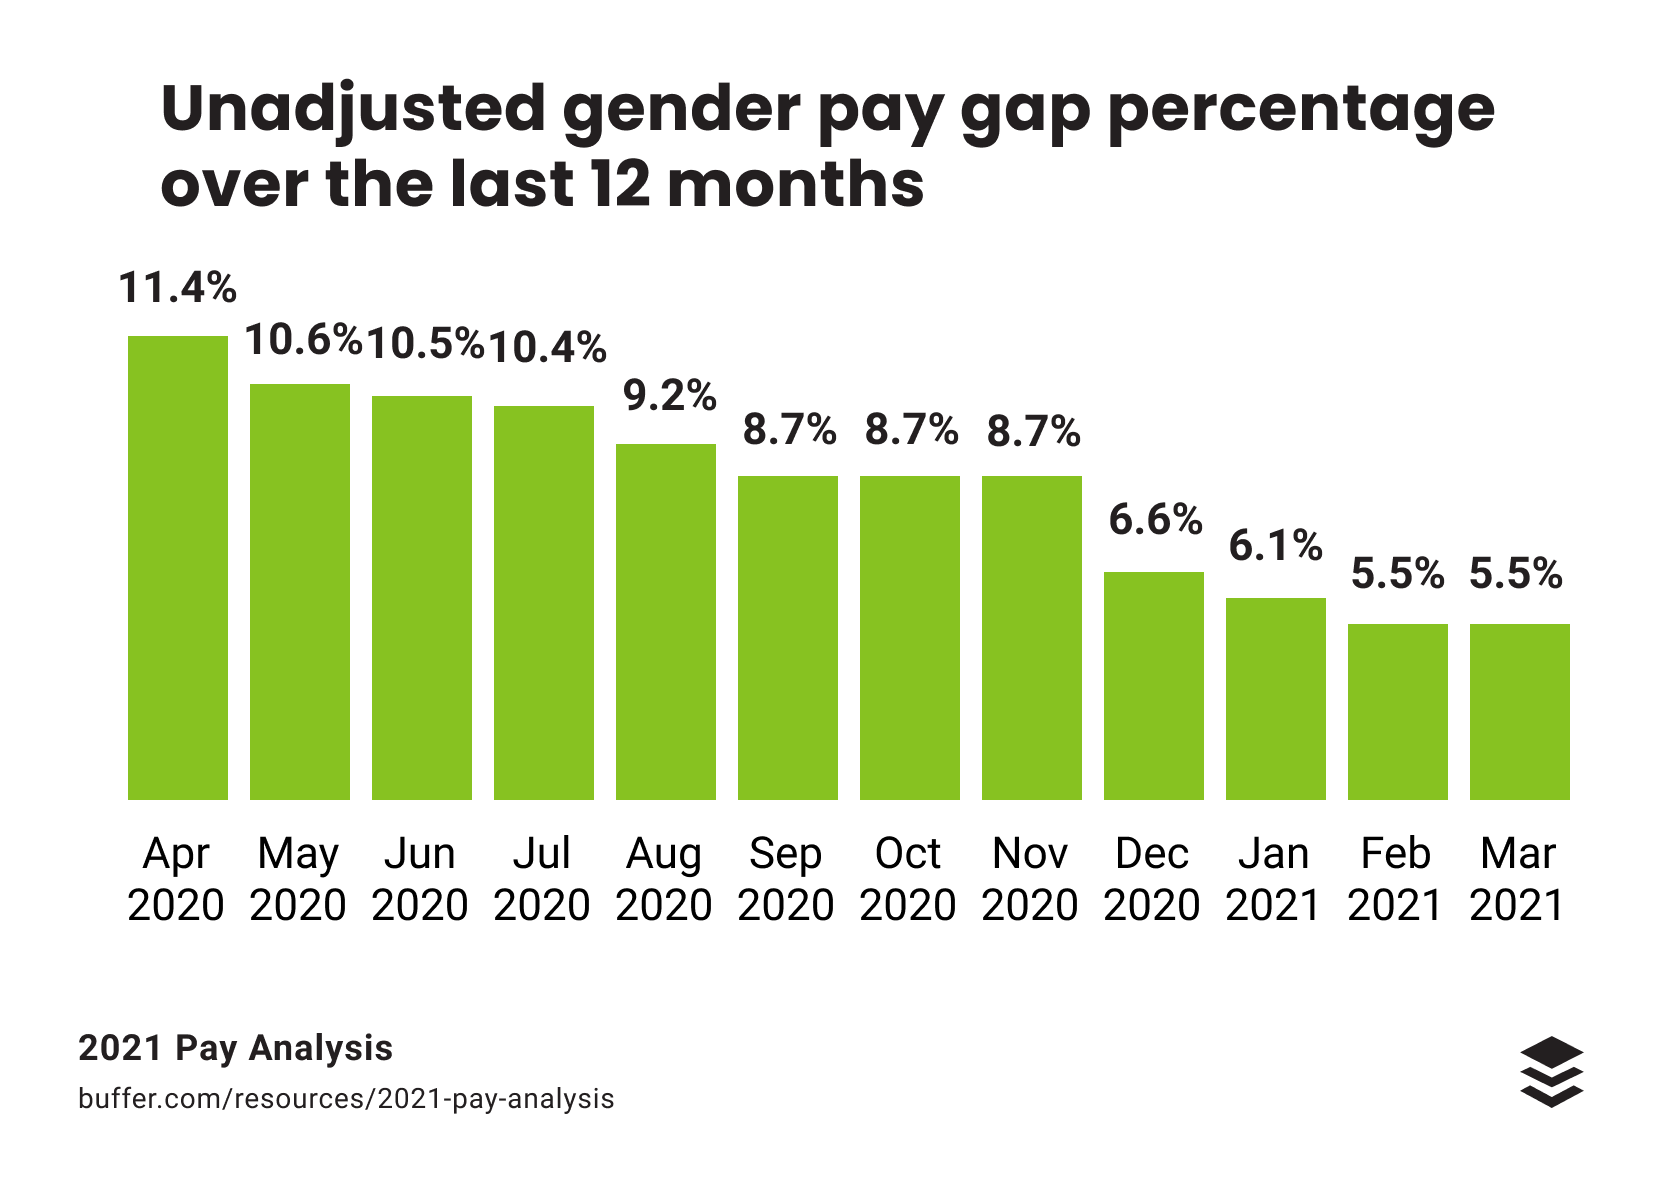 2021 Pay Analysis How We’ve Lowered Our Gender Pay Gap From 15 to 5.5